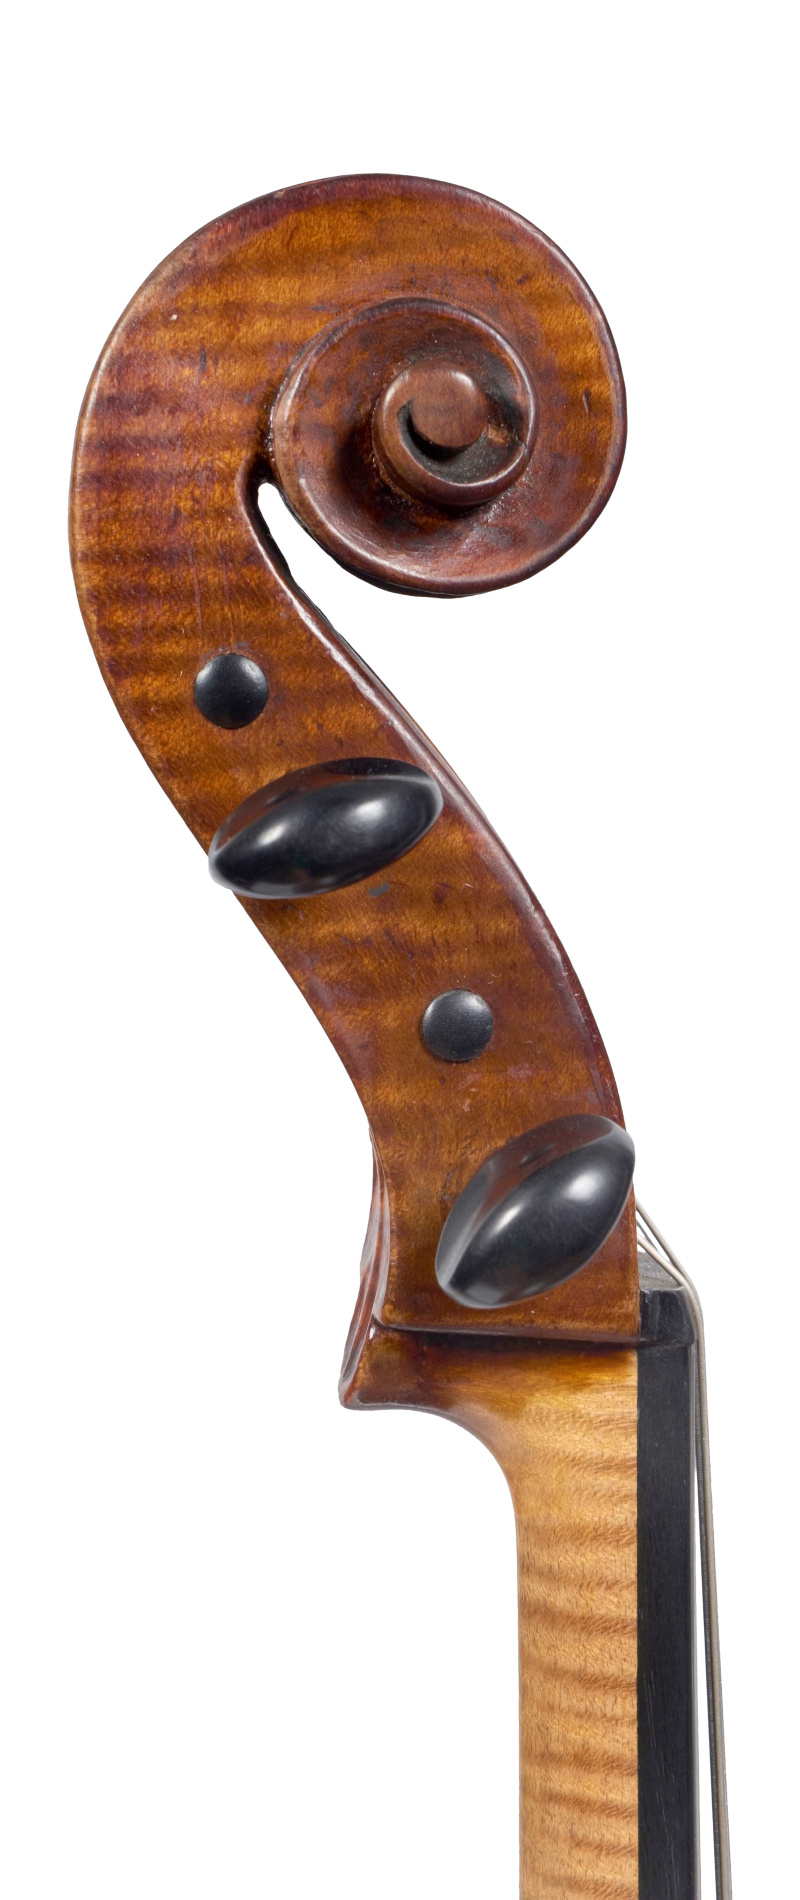 Scroll of a viola by Gaetano Sgarabotto, circa 1920. This viola has a full and warm sound with a singing A string and an open bass register.